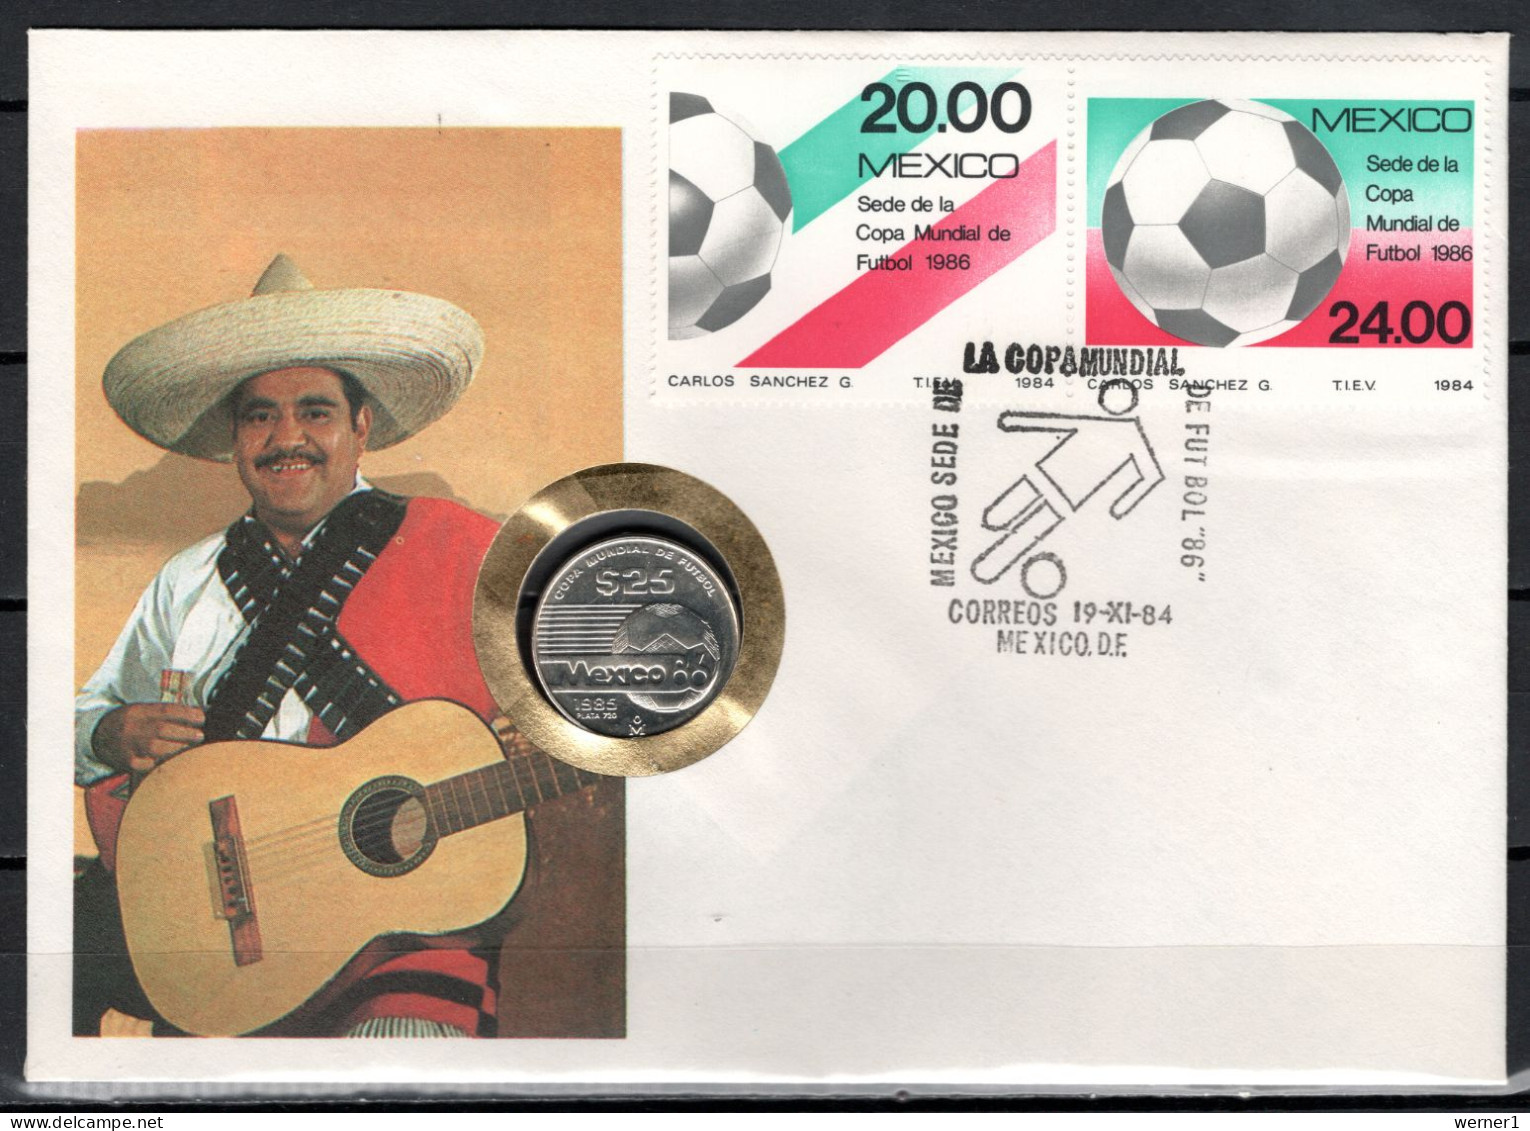 Mexico 1984 Football Soccer World Cup Numismatic Cover With 25 Peso Silver Coin - 1986 – Messico